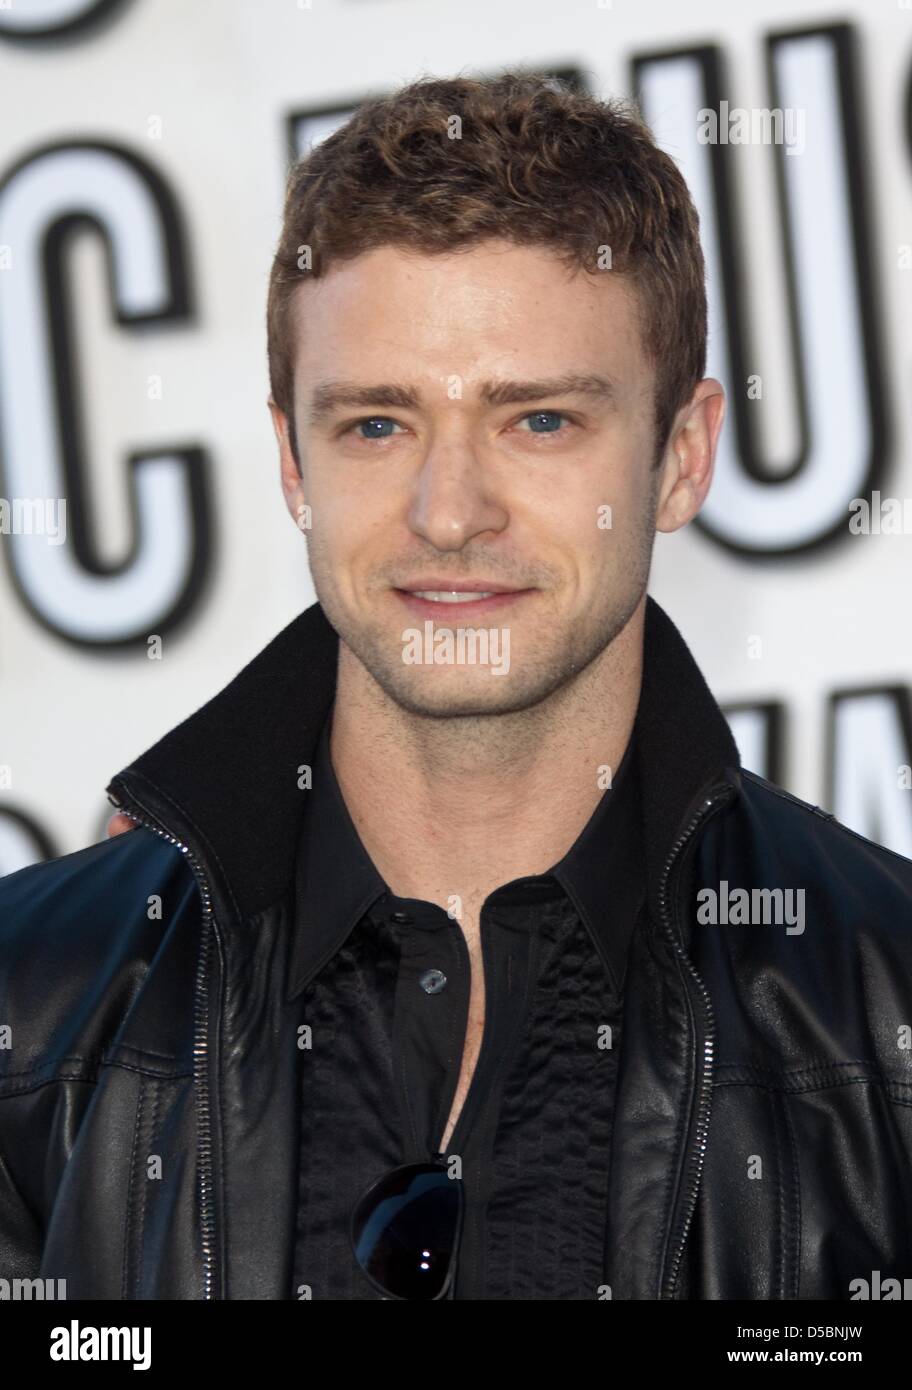 Singer Justin Timberlake attends the 2010 MTV Video Music Awards at the Nokia Theatre in Los Angeles, USA, 12 September 2010. Photo: Hubert Boesl Stock Photo